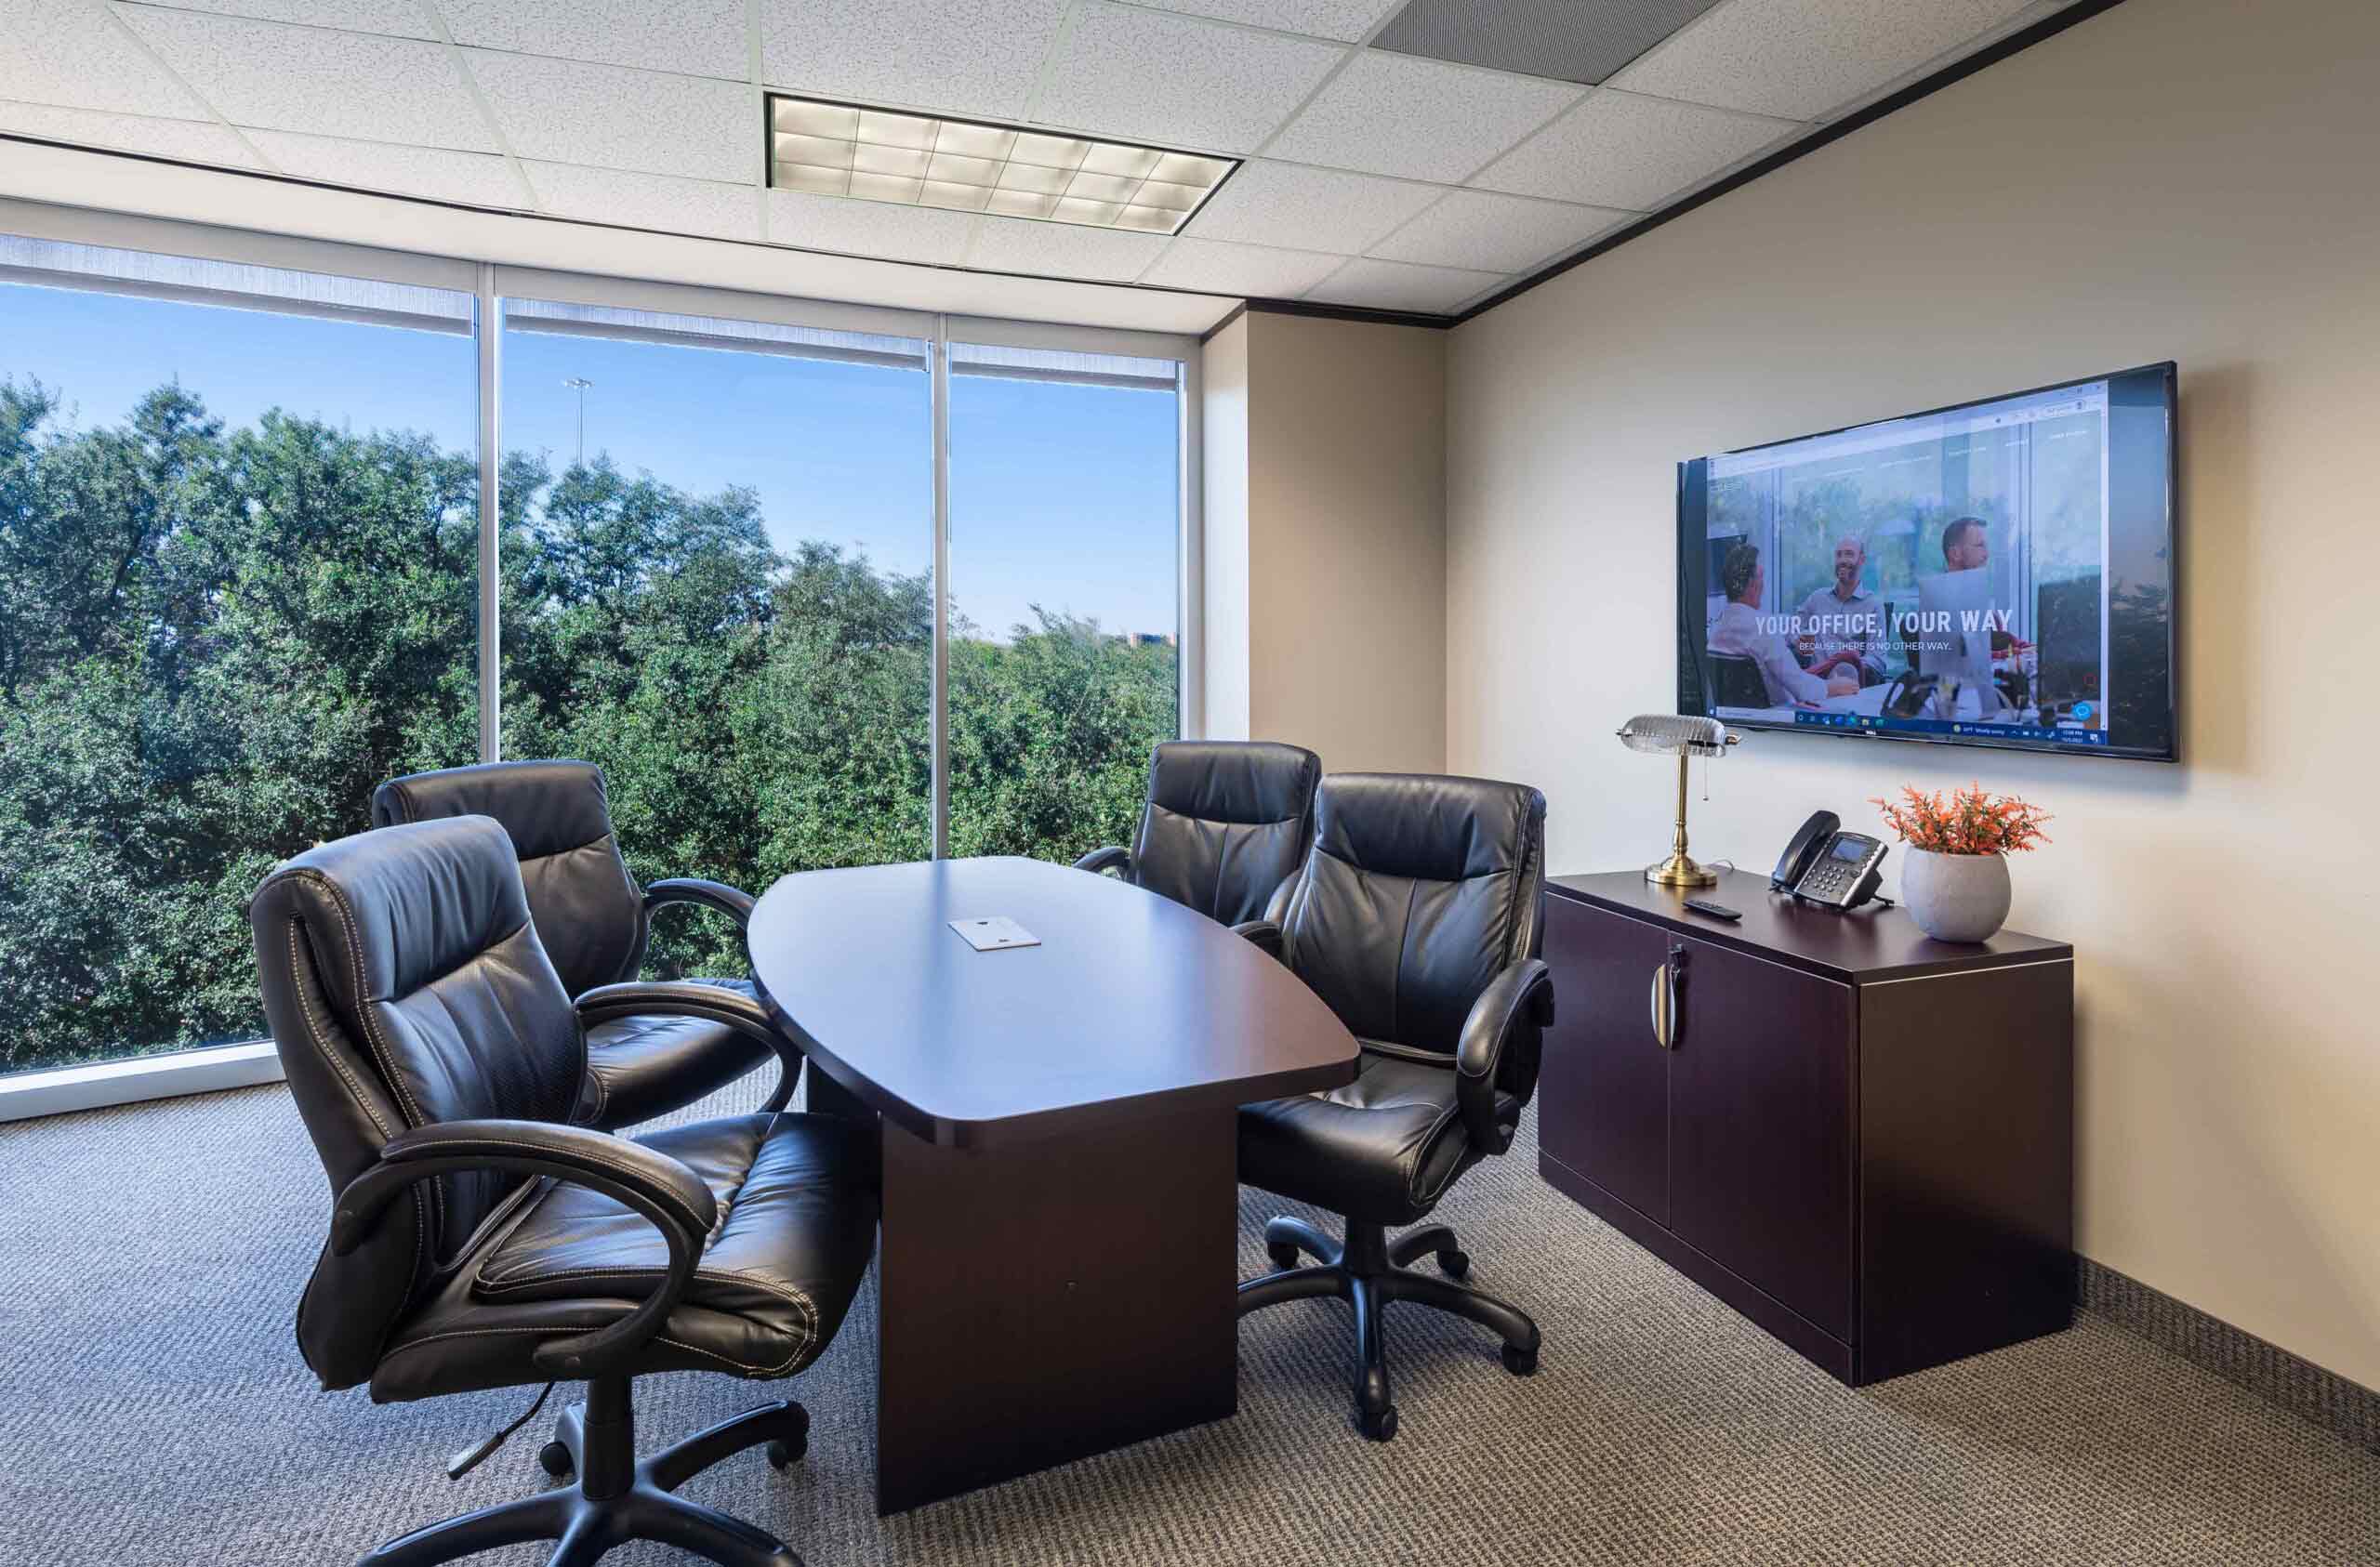 North Dallas meeting space with floor to ceiling windows and natural light.